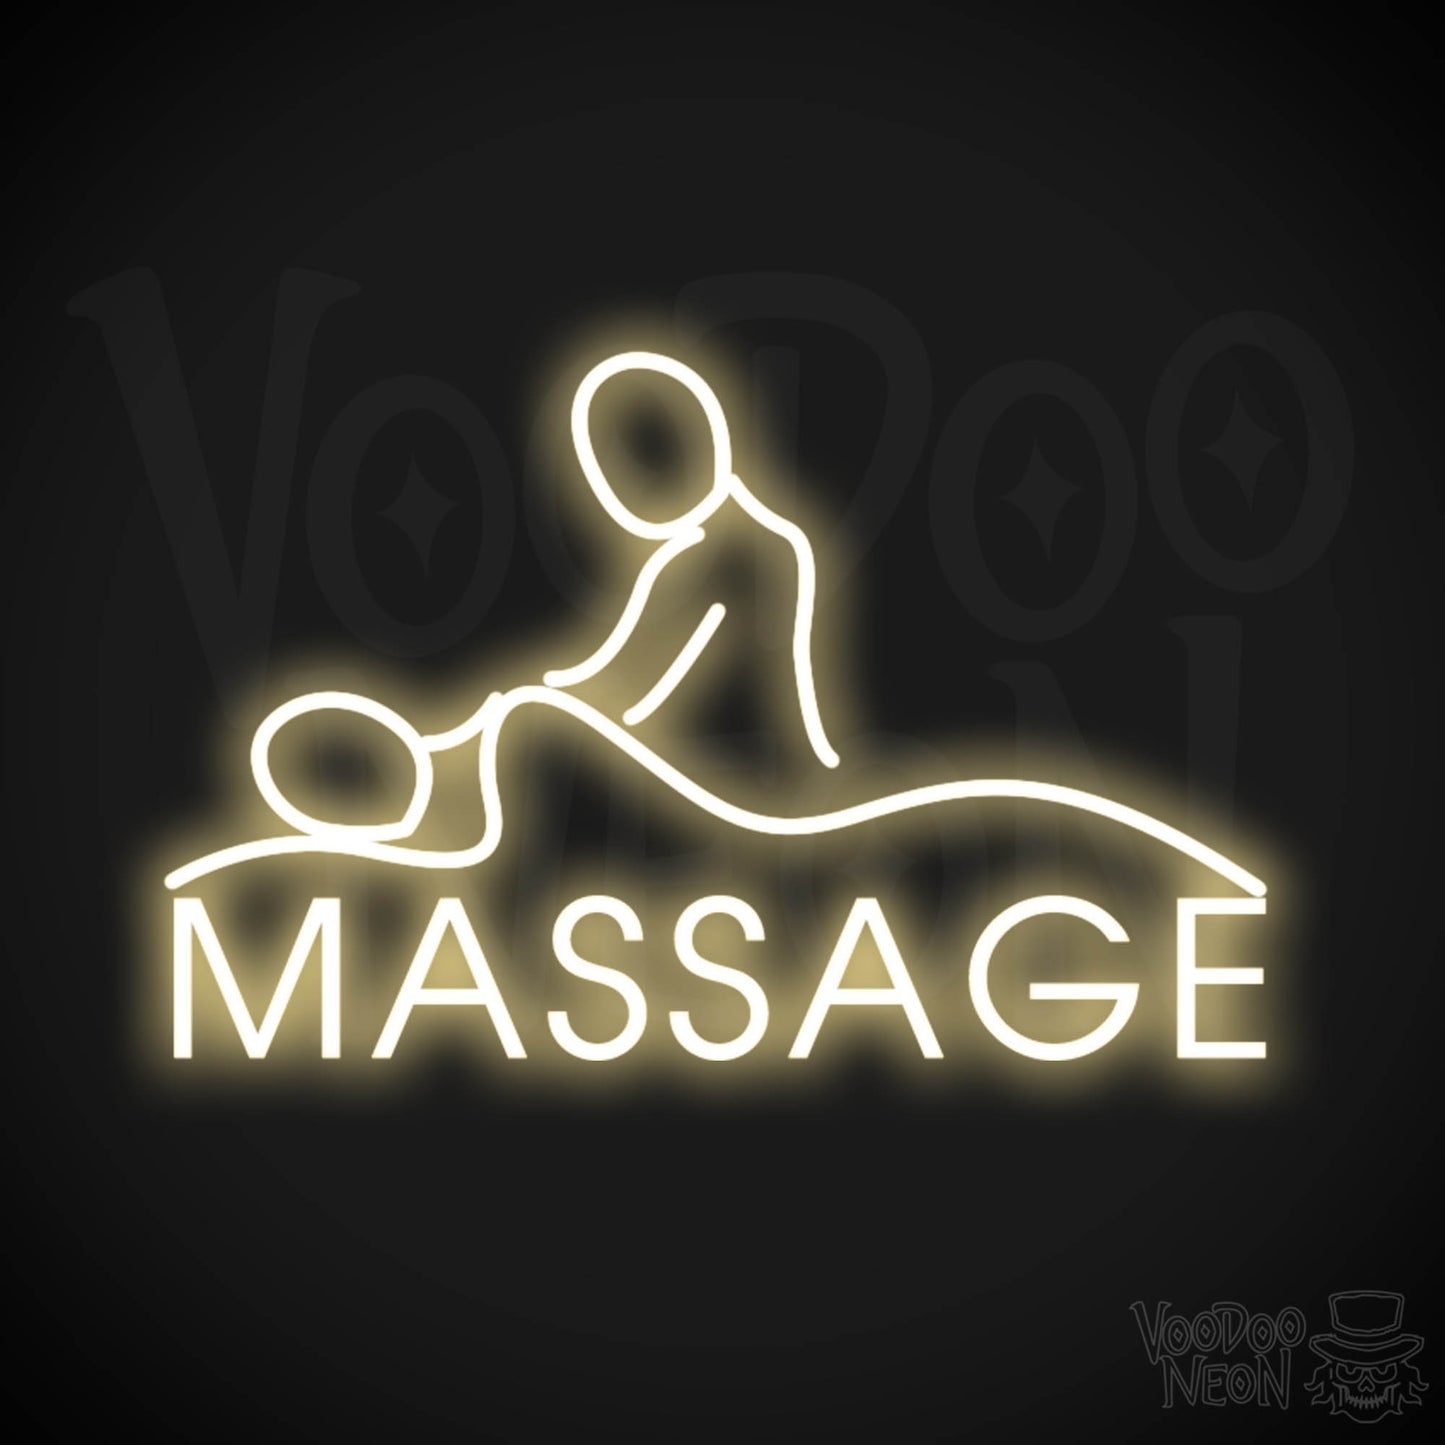 Massage Neon Sign - Neon Massage Sign - Massage Light Up Sign - Color Warm White